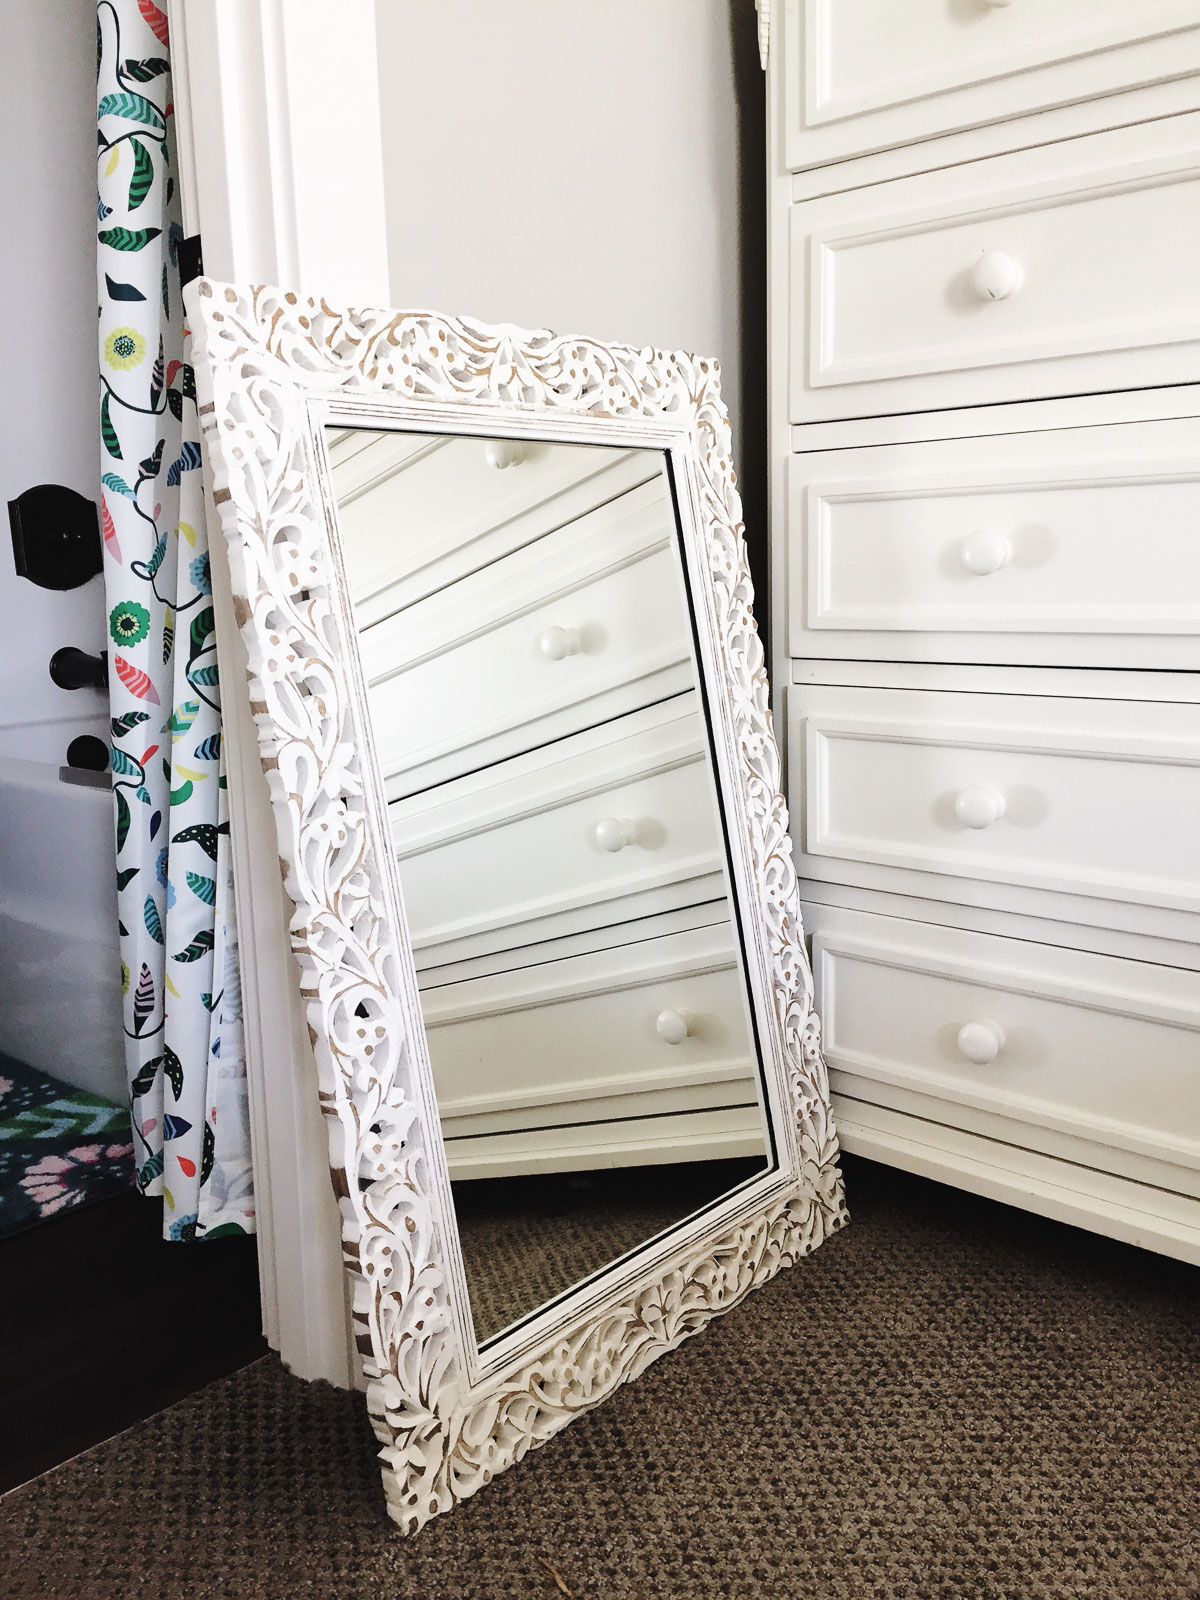 We are almost at the end of the Spring 2019 One Room Challenge, and have just one week left to put all the finishing touches on our daughter's bedroom makeover!